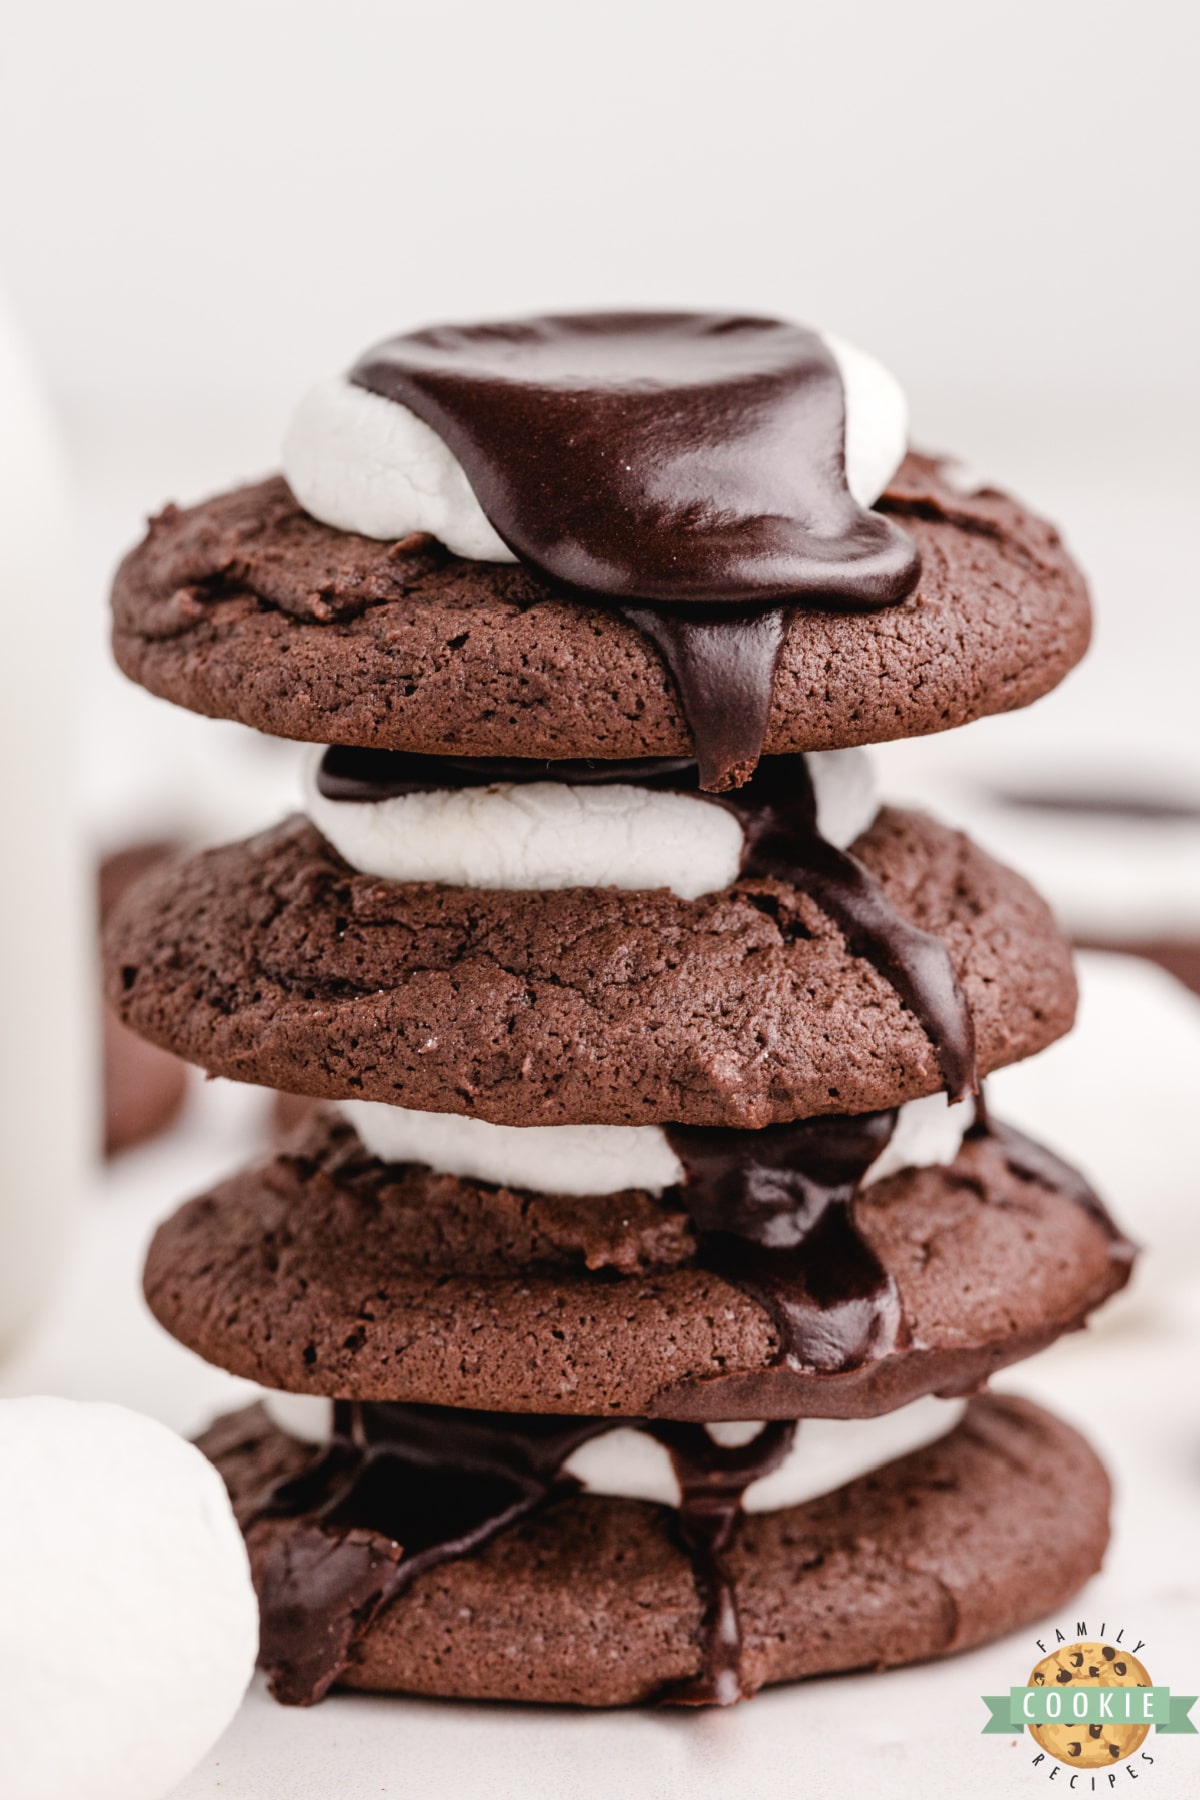 Soft and chewy chocolate cookies with a marshmallow and chocolate frosting on top